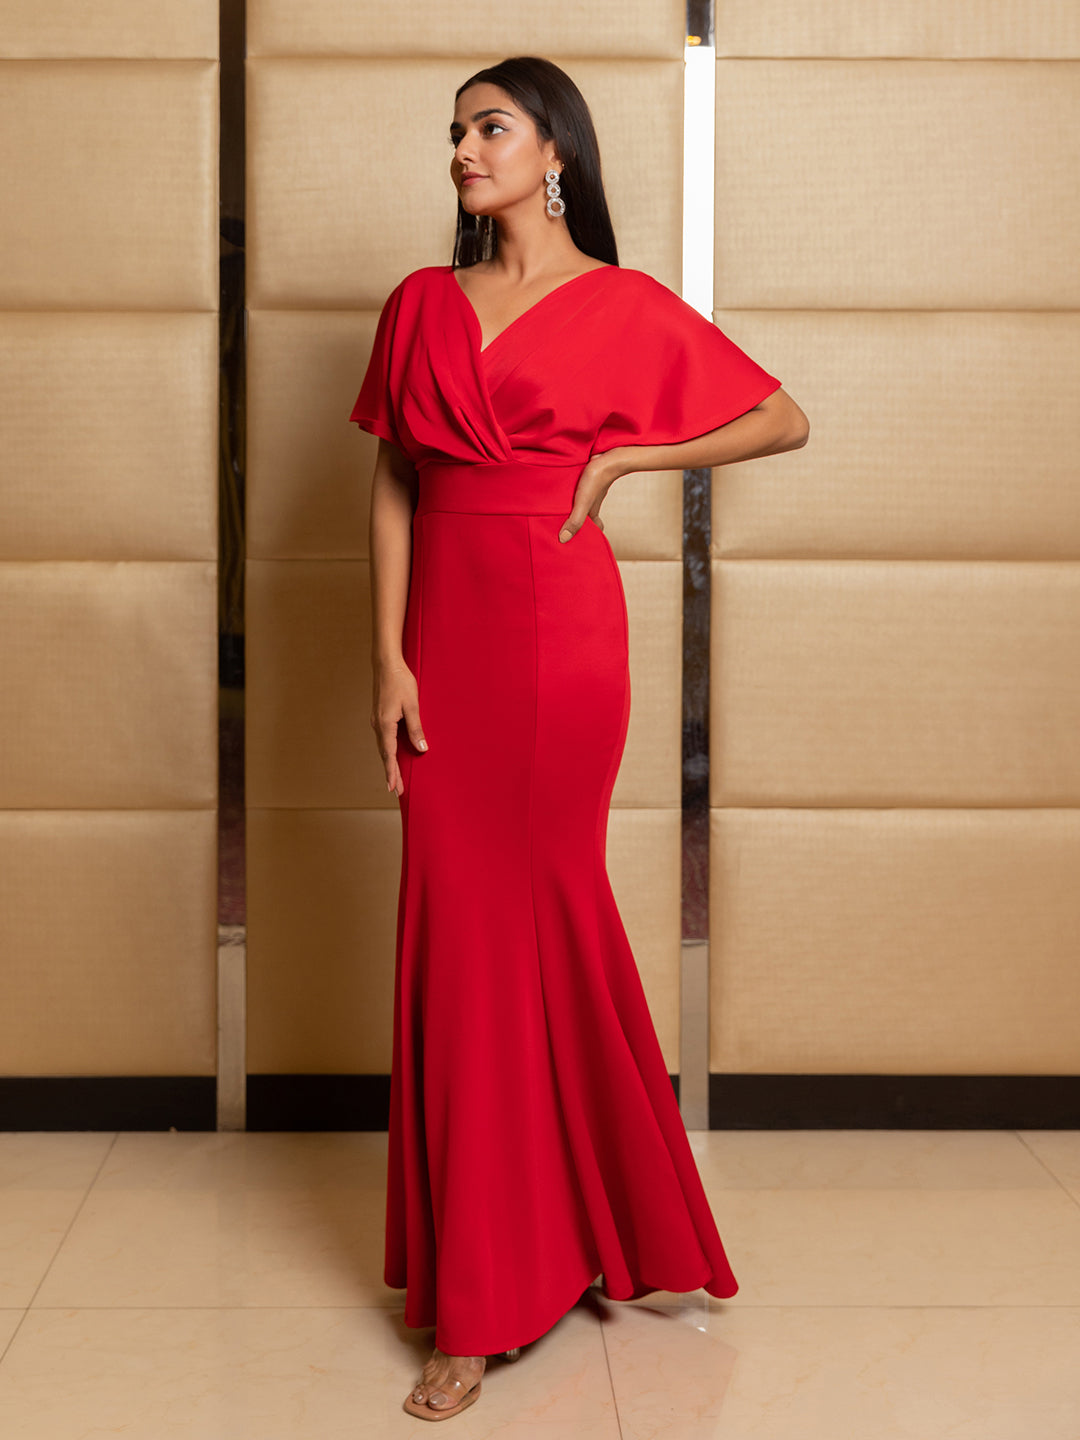 Red Gown Ideas To Ace Up Your Photo Shoots – Shopzters